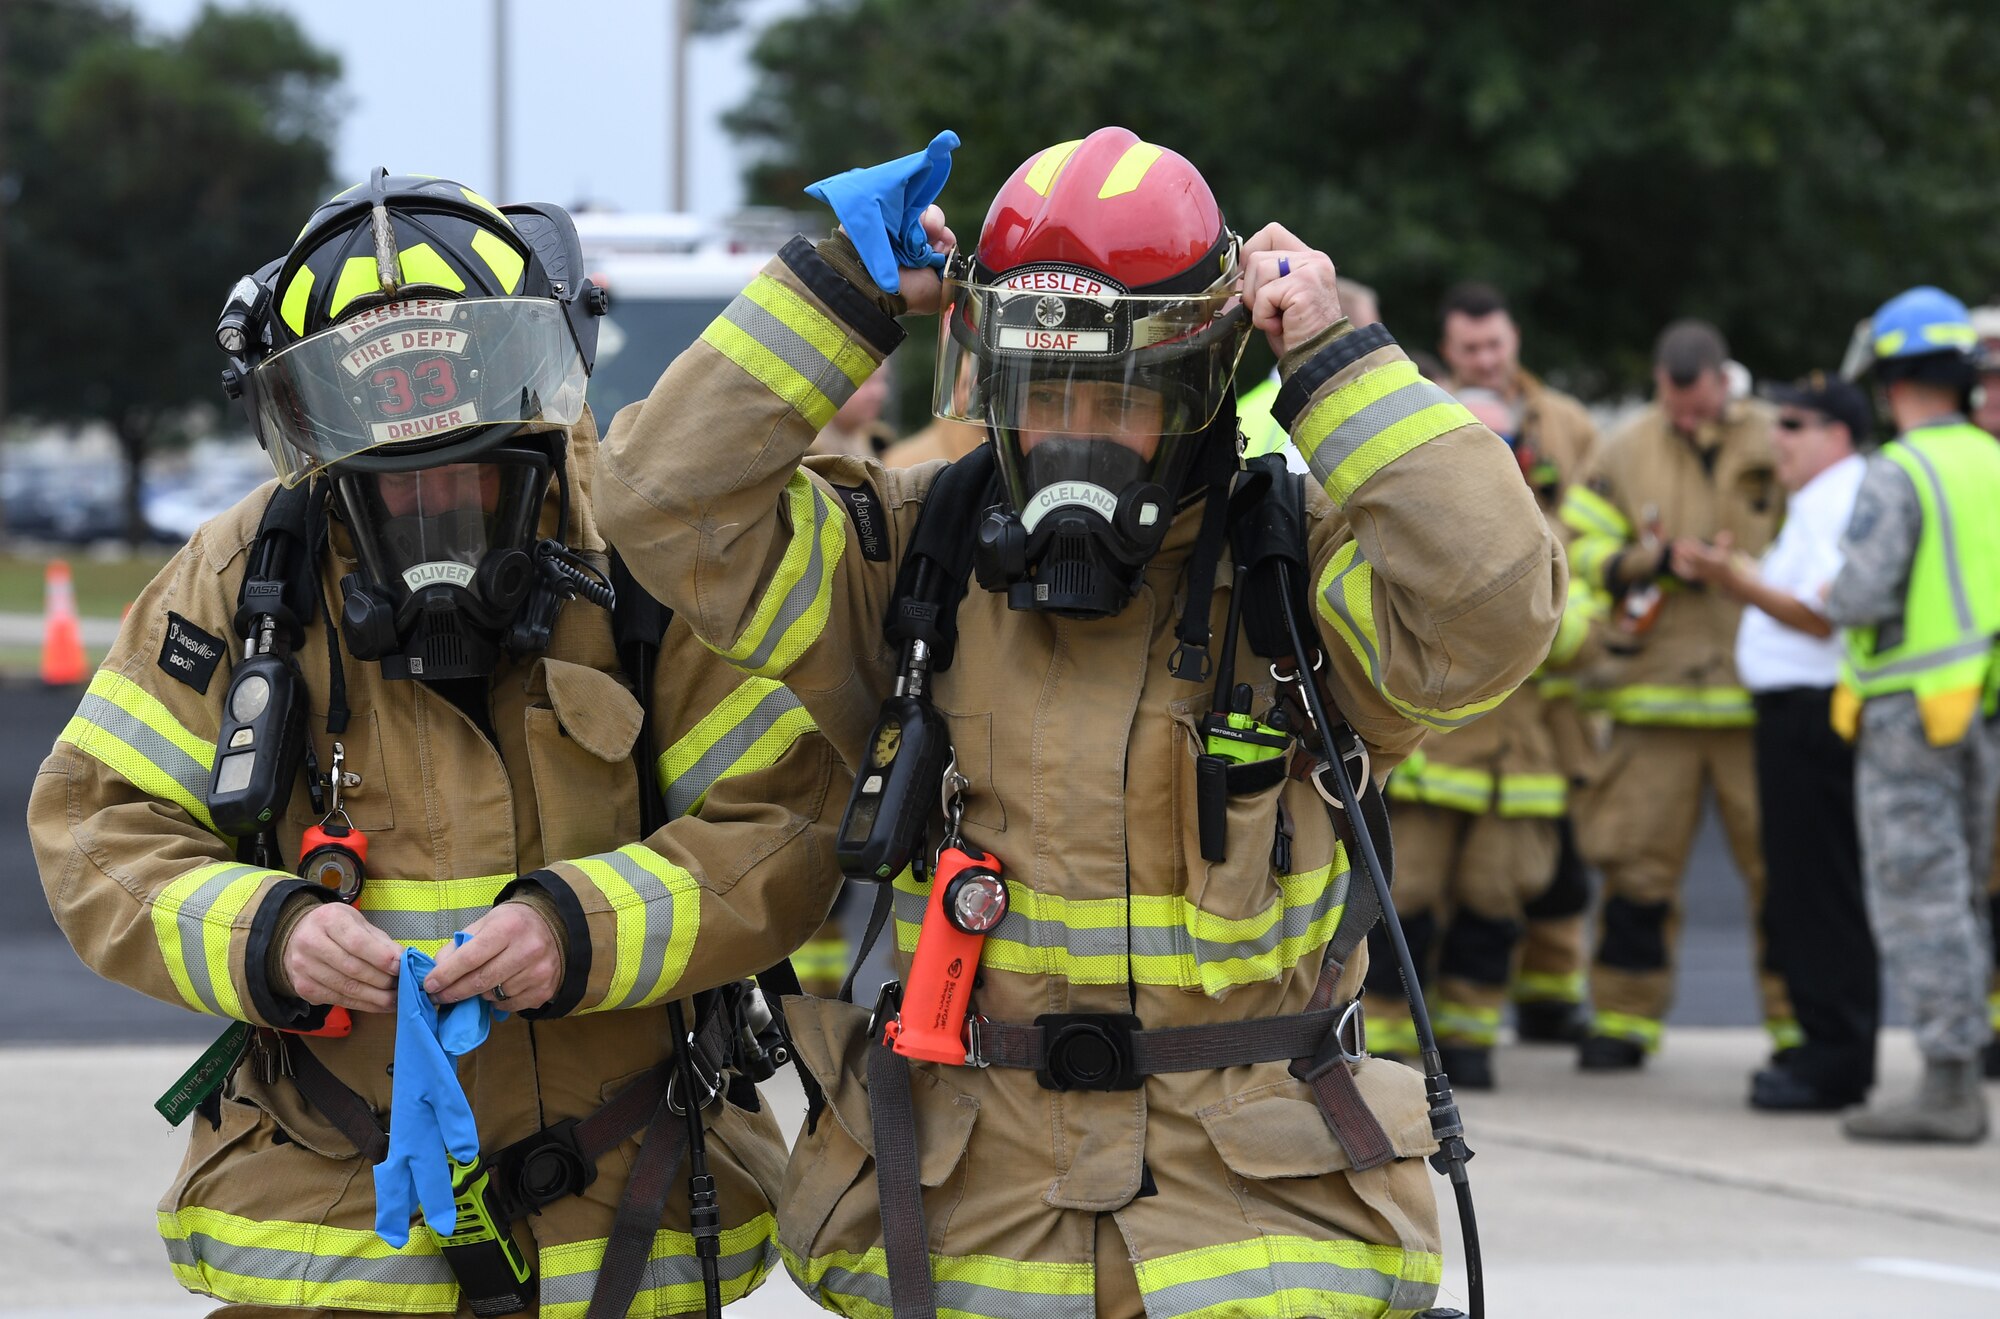 Christopher Oliver and David Cleland, 81st Infrastructure Division firefighters, prepare to make the initial entry into the Live Oak Dining Facility during the Anti-Terrorism, Force Protection Condition and Chemical, Biological, Radiological, Nuclear and high-yield Explosives training exercise at Keesler Air Force Base, Mississippi, Oct. 24, 2019. The exercise scenario simulated a gym bag with ricin found by Keesler personnel who alerted first responders. The exercise was conducted to evaluate the mission readiness and security of Keesler. (U.S. Air Force photo by Kemberly Groue)